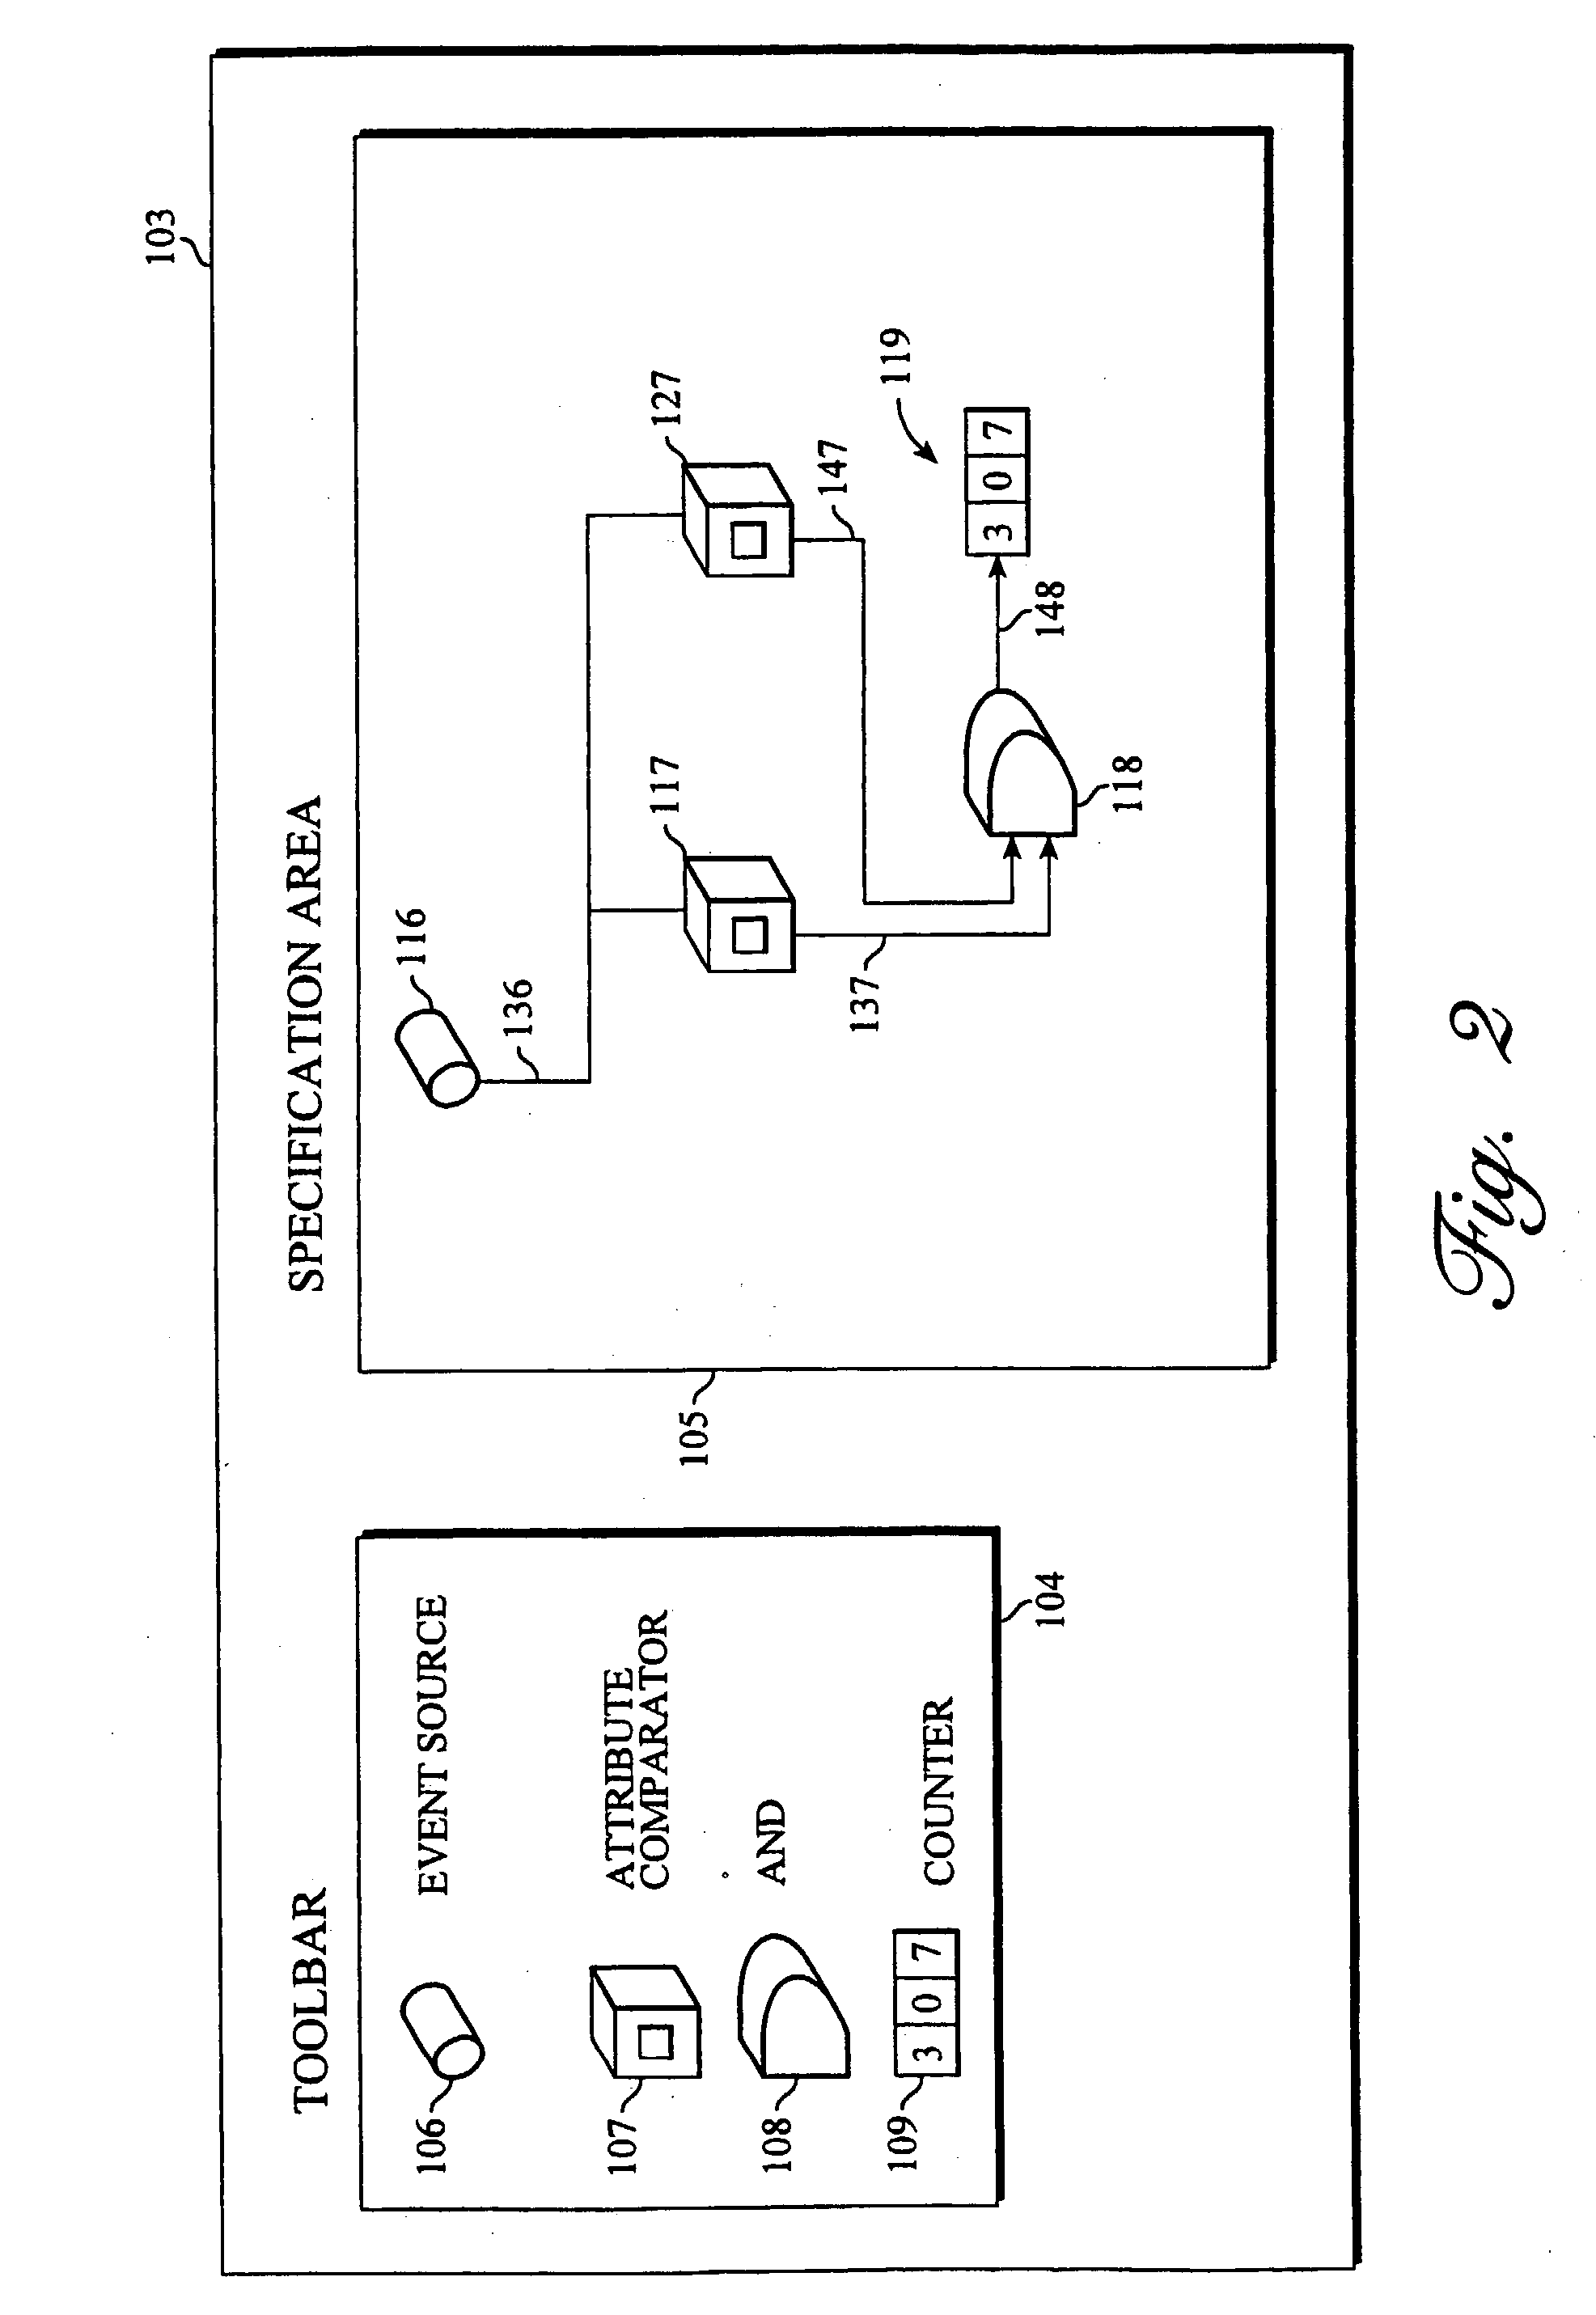 Functional coverage analysis systems and methods for verification test suites